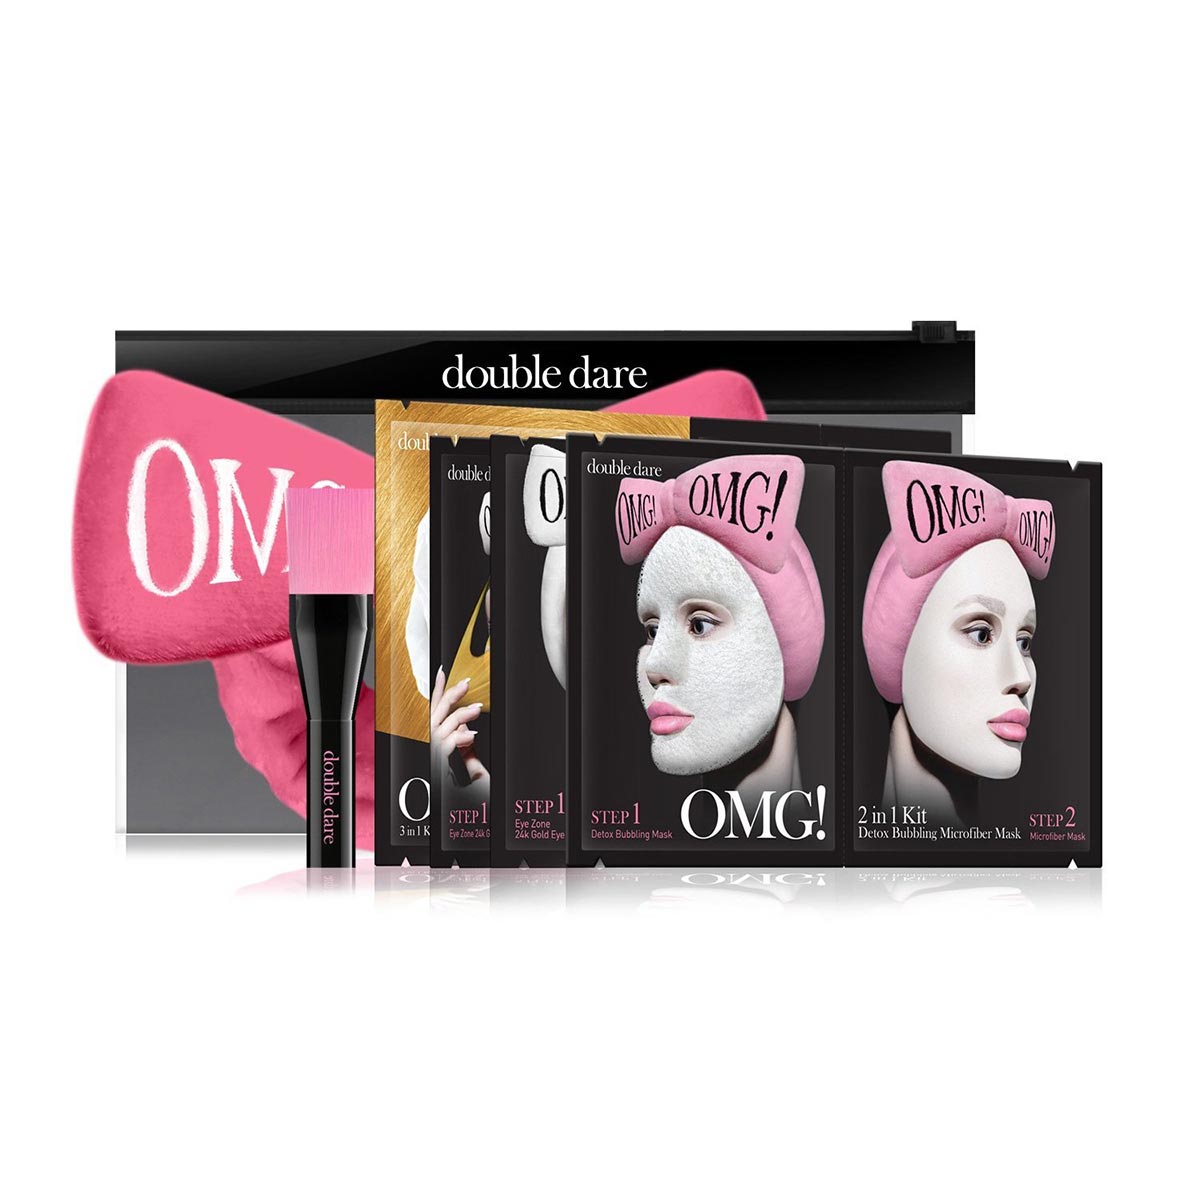 OMG! Premium Package Hot Pink(4masks with Hot Pink Hair Band)